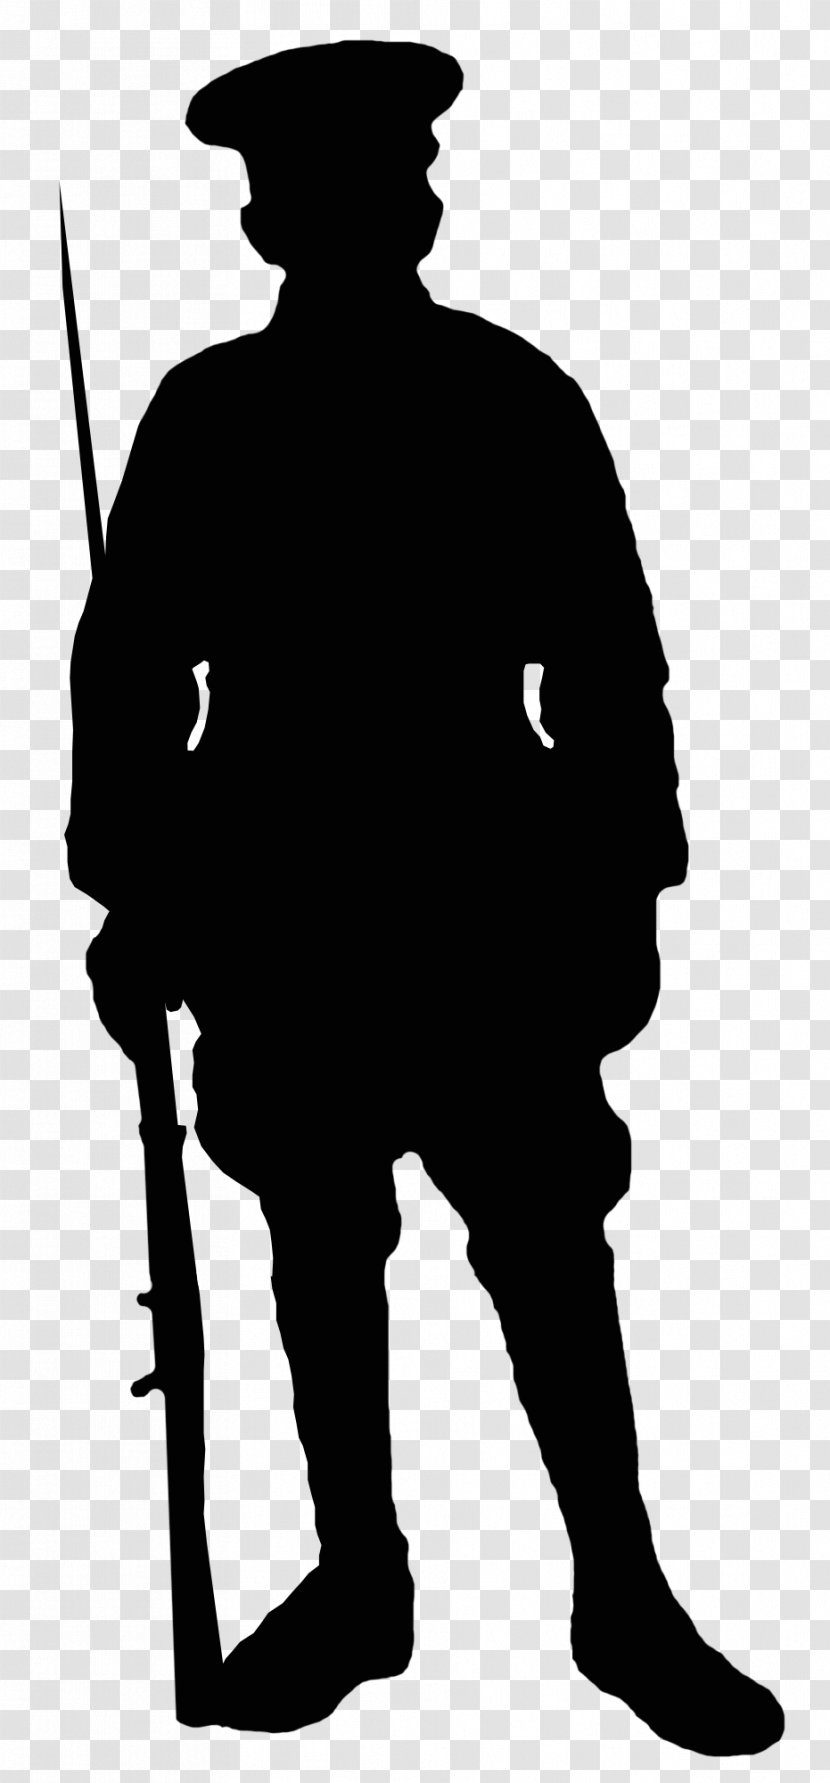 First World War Silhouette Soldier Military Transparent PNG